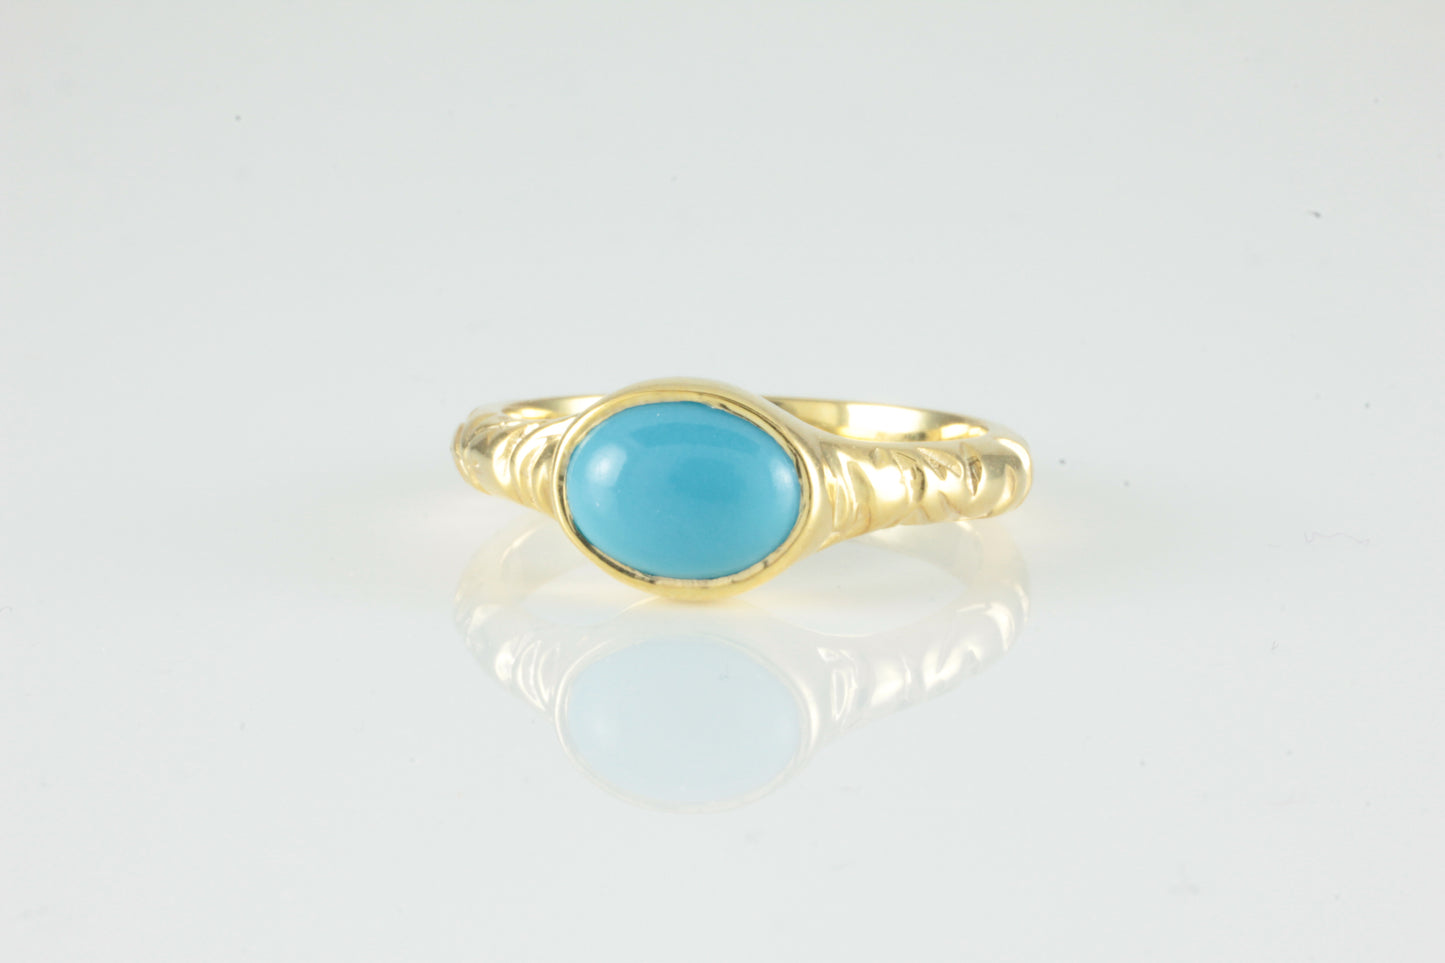 'Odessos' Georgian style Oval Turquoise Cabochon Ring